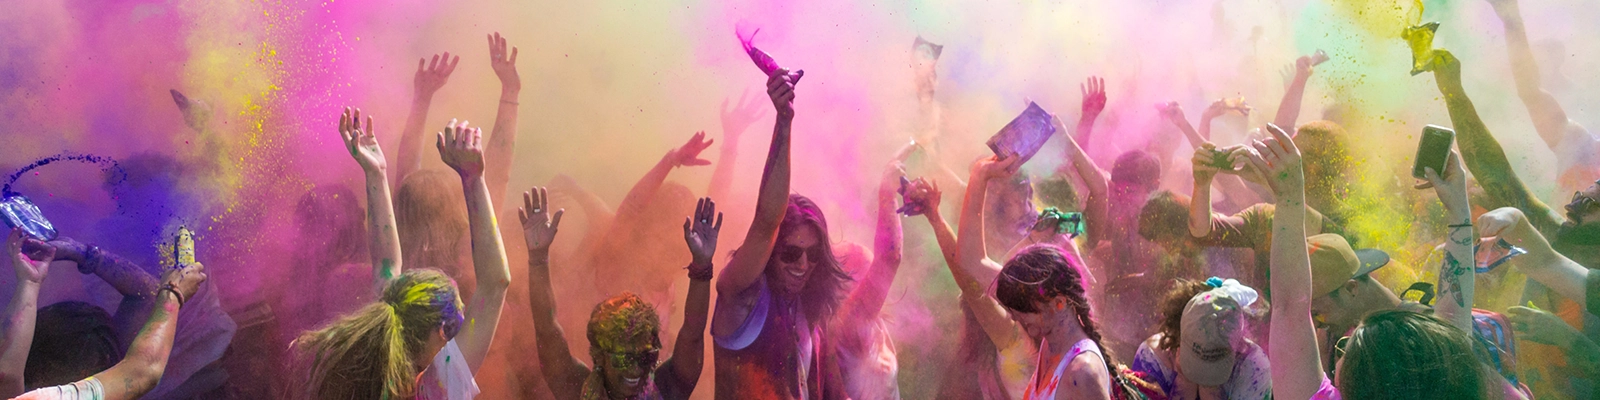 Colorful celebration during the Holi festival, people throwing vibrant powders in the air